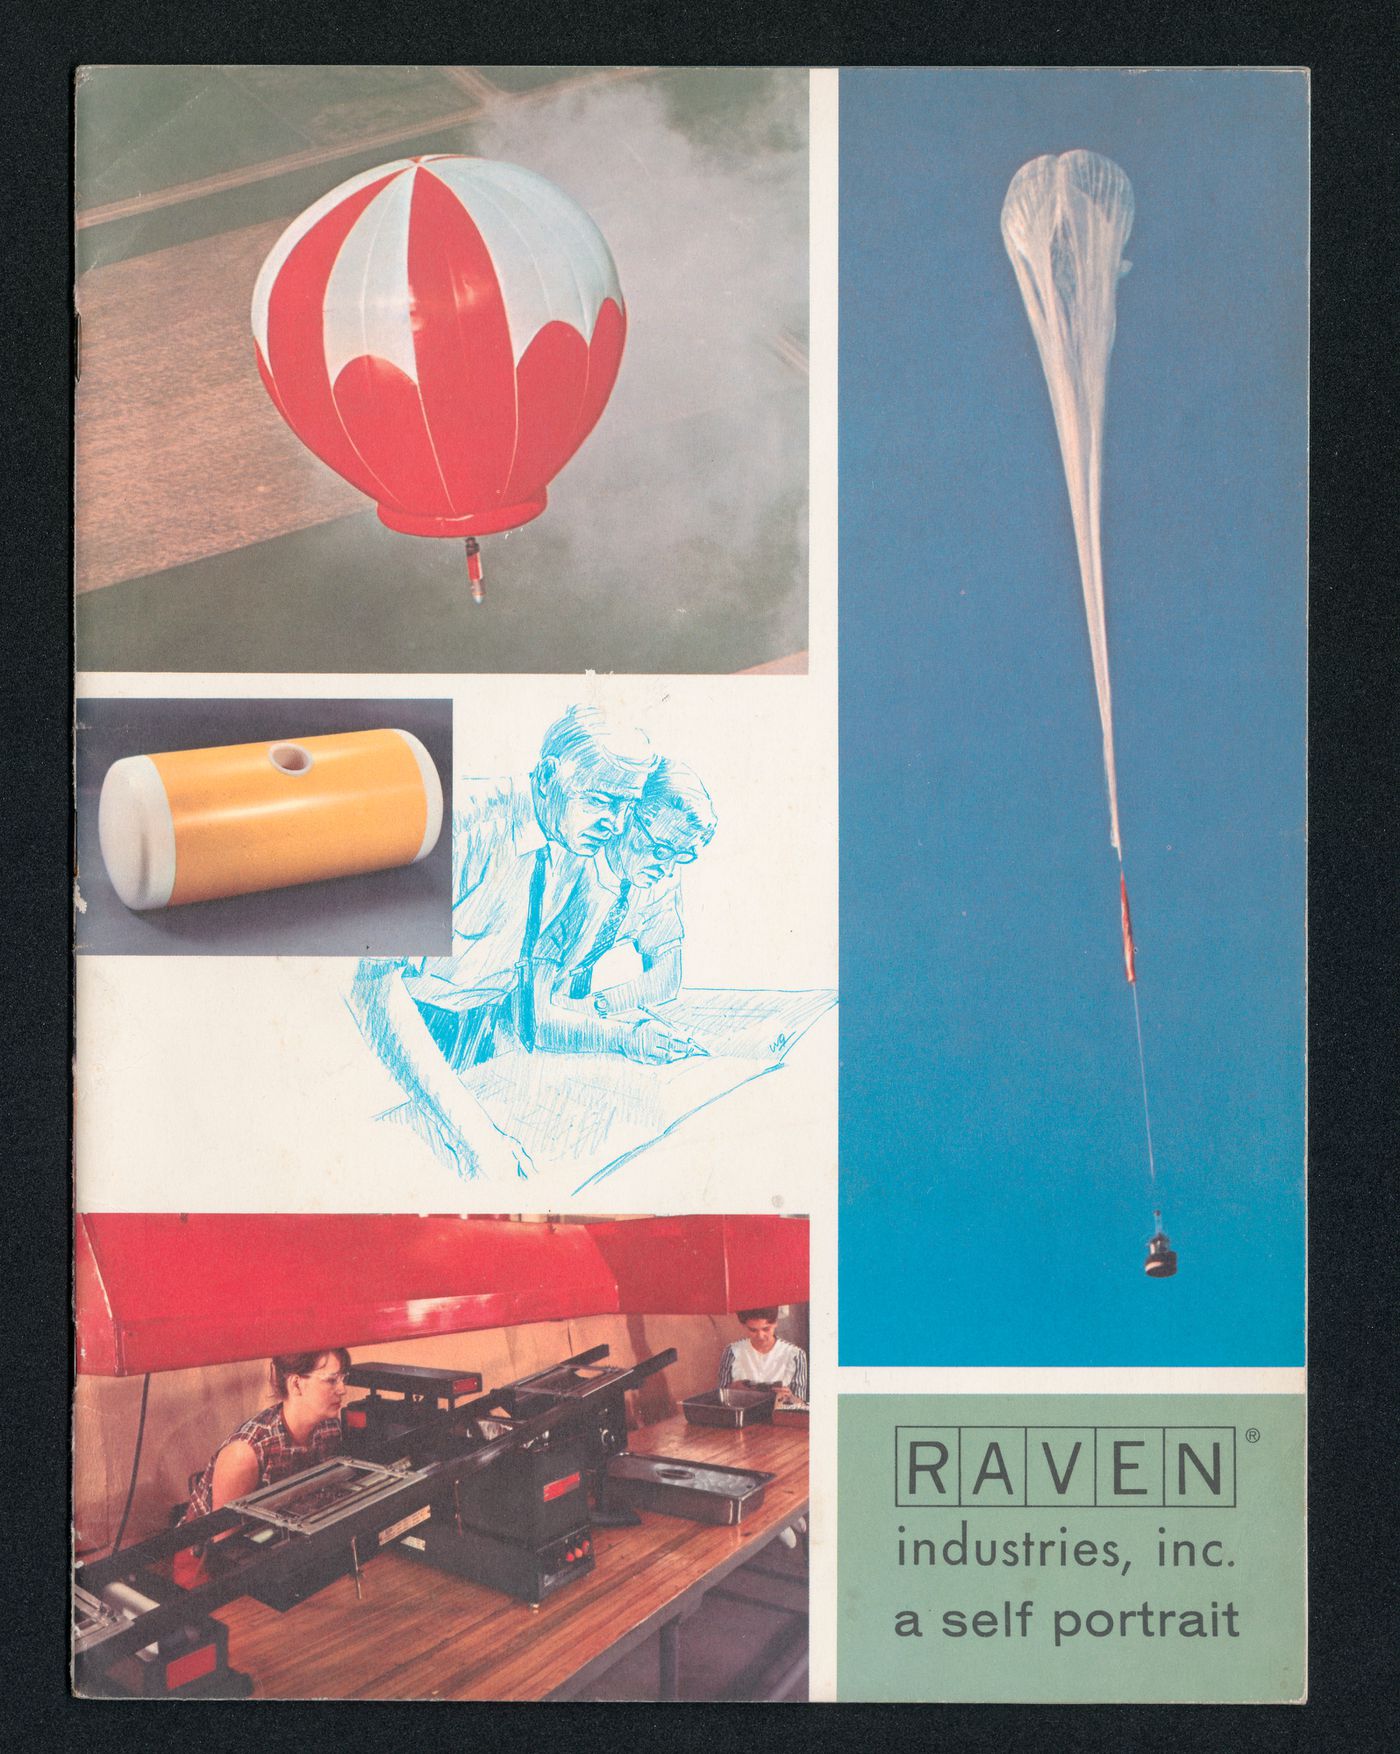 Catalogue of inflatable products by Raven Industries Inc.